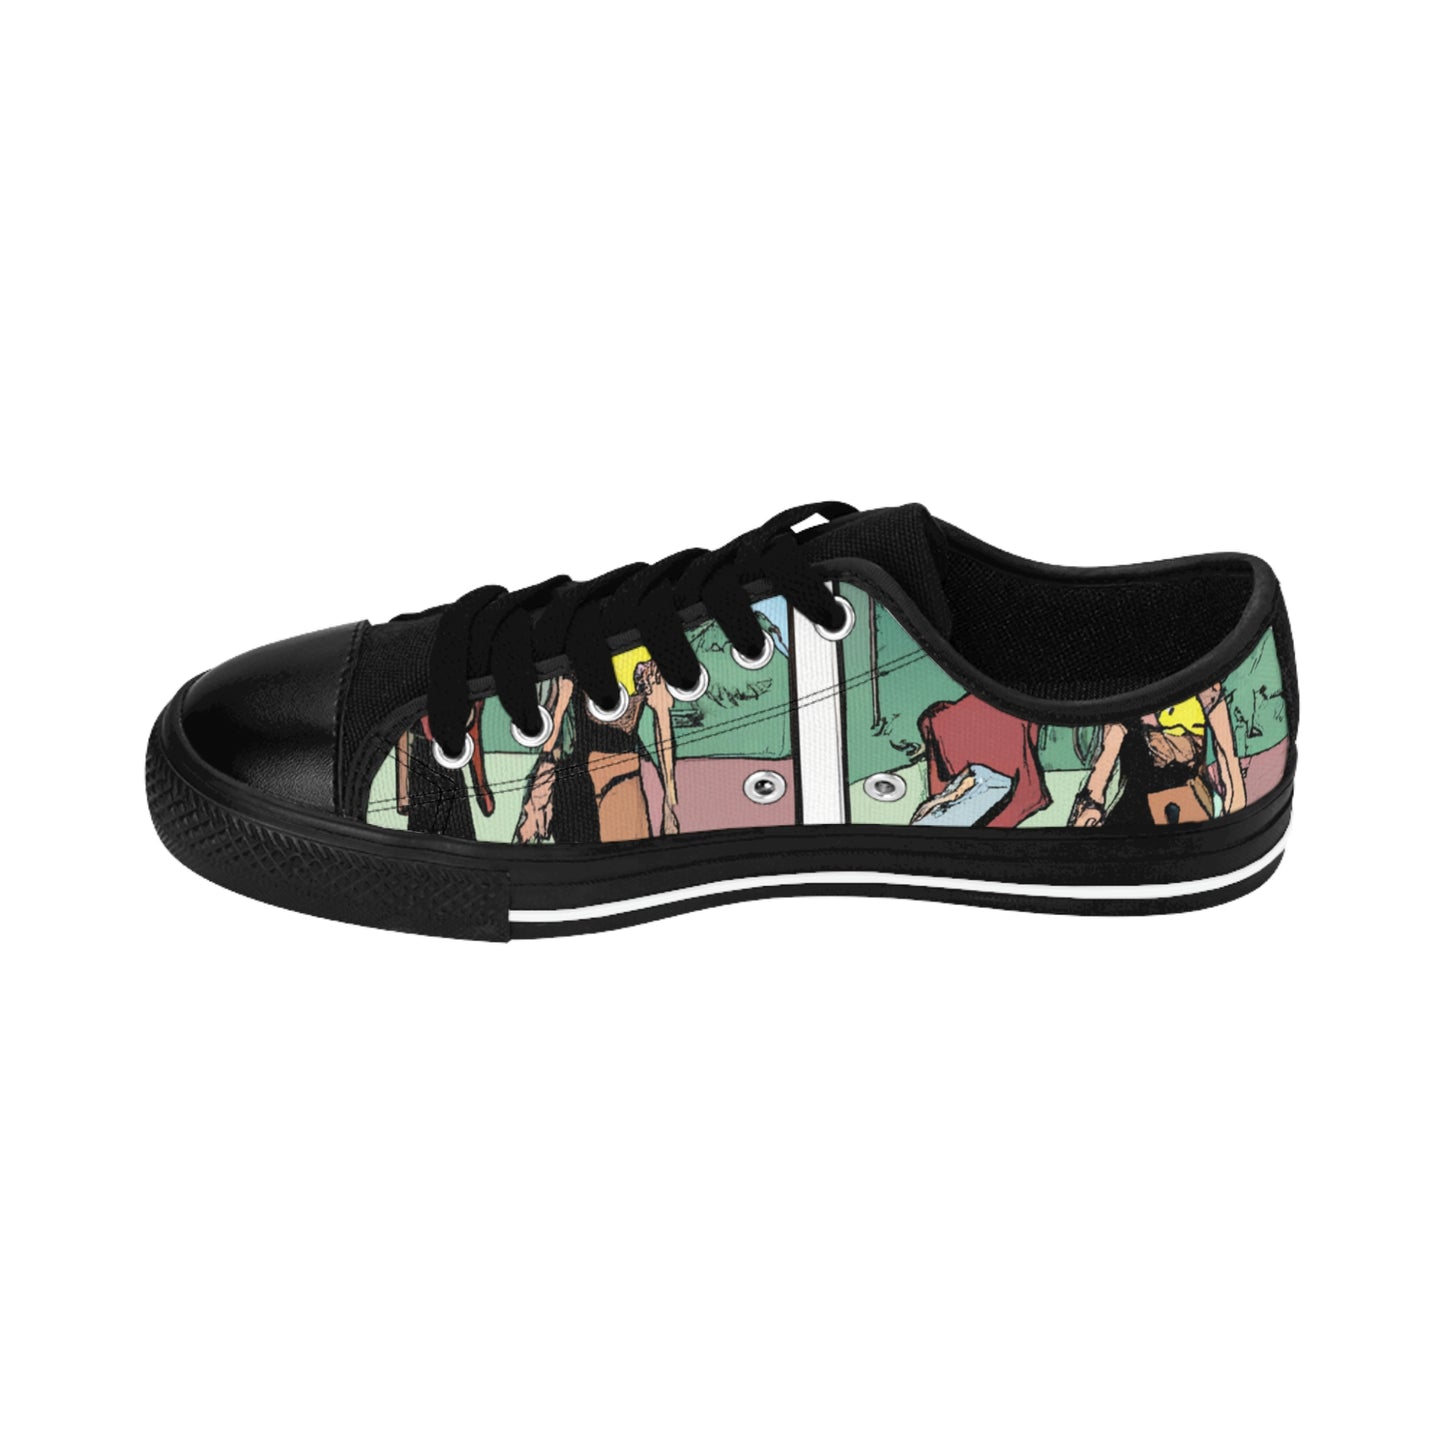 .

Rotholfo the Shoemaker - Comic Book Low Top